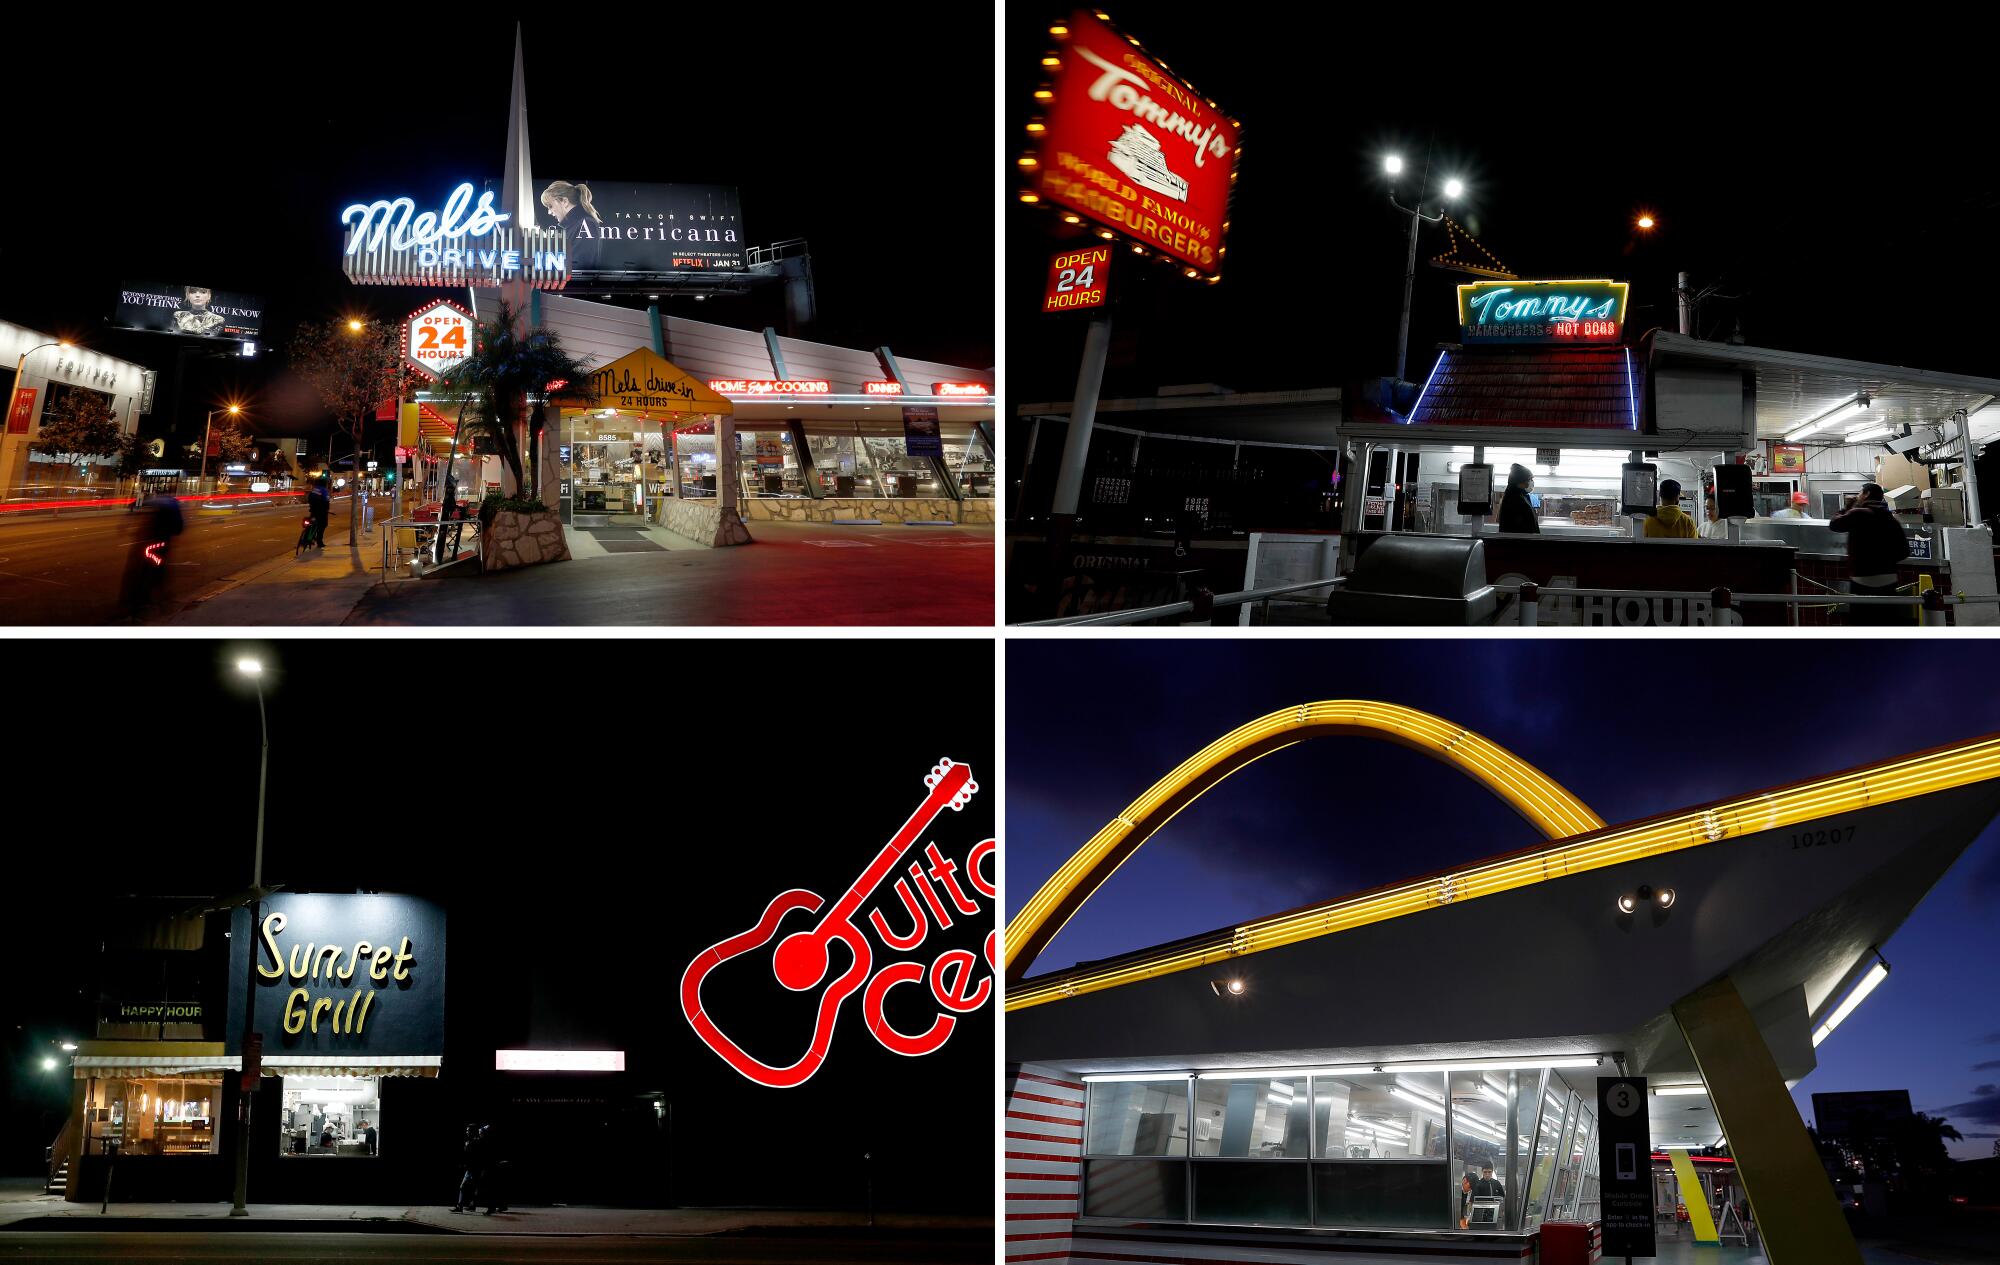 Clockwise from top left: Mel's Drive-In in West Hollywood remains open, serving takeout and delivery orders, even as most businesses on the Sunset Strip have closed; customers line up at the original Tommy's in the Rampart District; the retro McDonald's sits at the intersection of Lakewood Boulevard and Florence Avenue in Downey; and the Sunset Grill in Hollywood remains open with takeout and delivery.